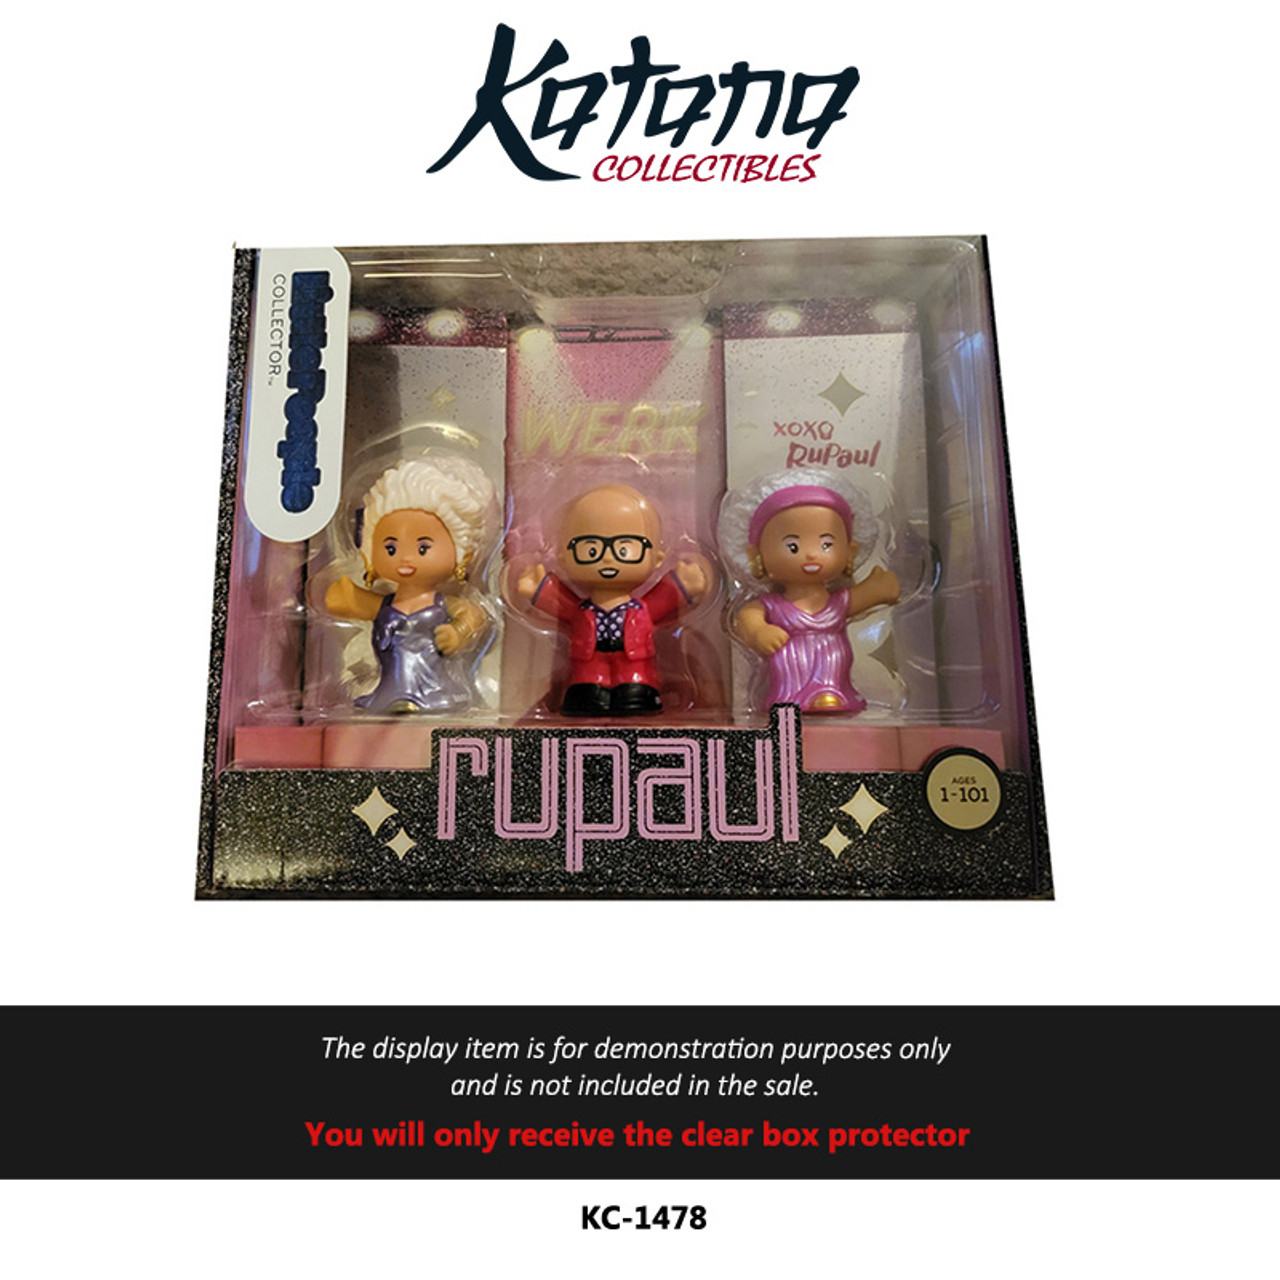 Katana Collectibles Protector For Little People Rupaul